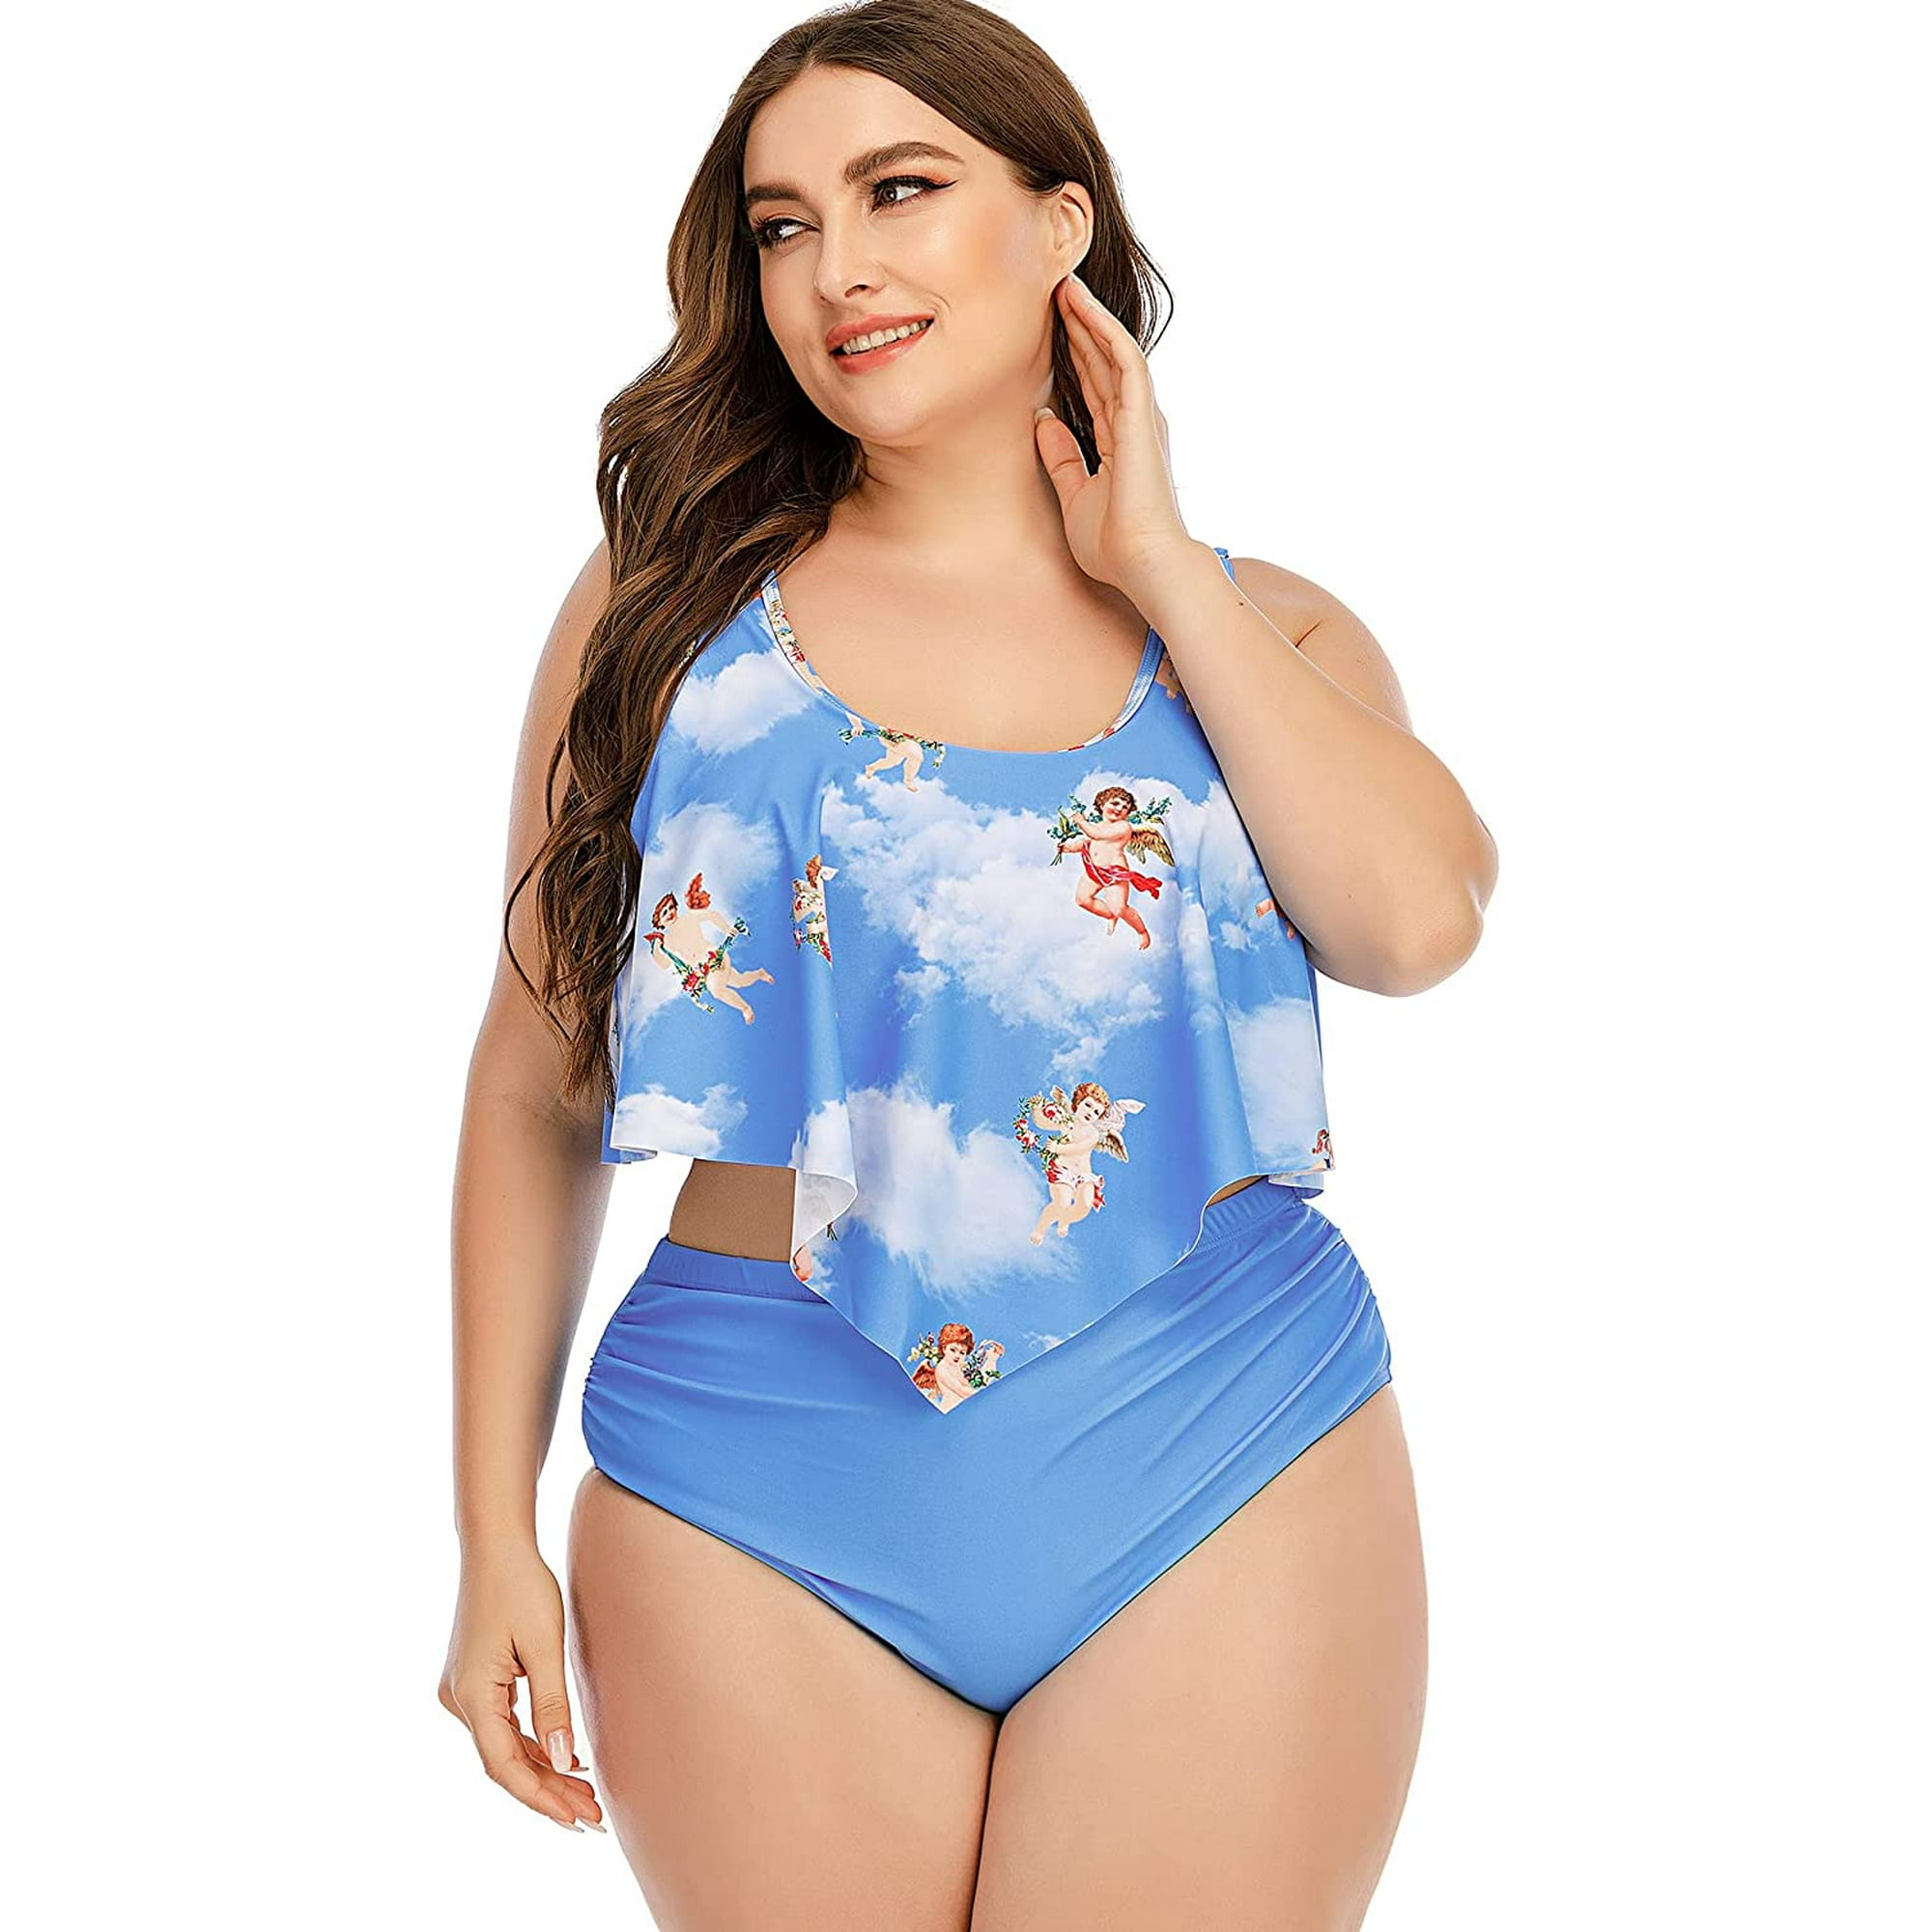 Dropship Plus Size Tie Dye Cut Out Knot Front One Piece Swimsuit; Women's  Plus Modest High Stretch Swimsuit to Sell Online at a Lower Price